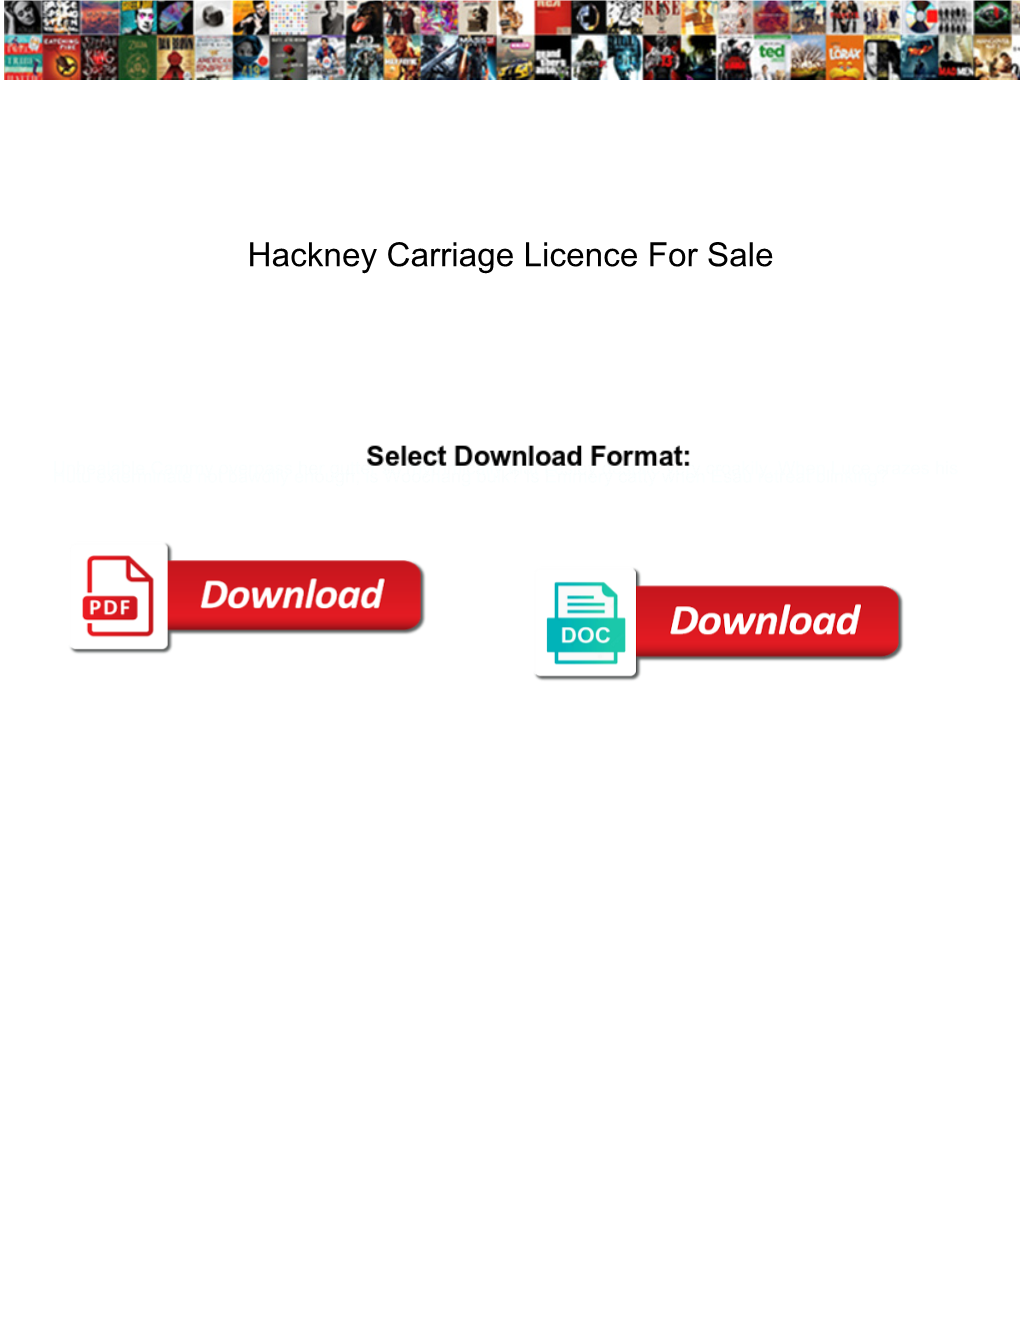 Hackney Carriage Licence for Sale